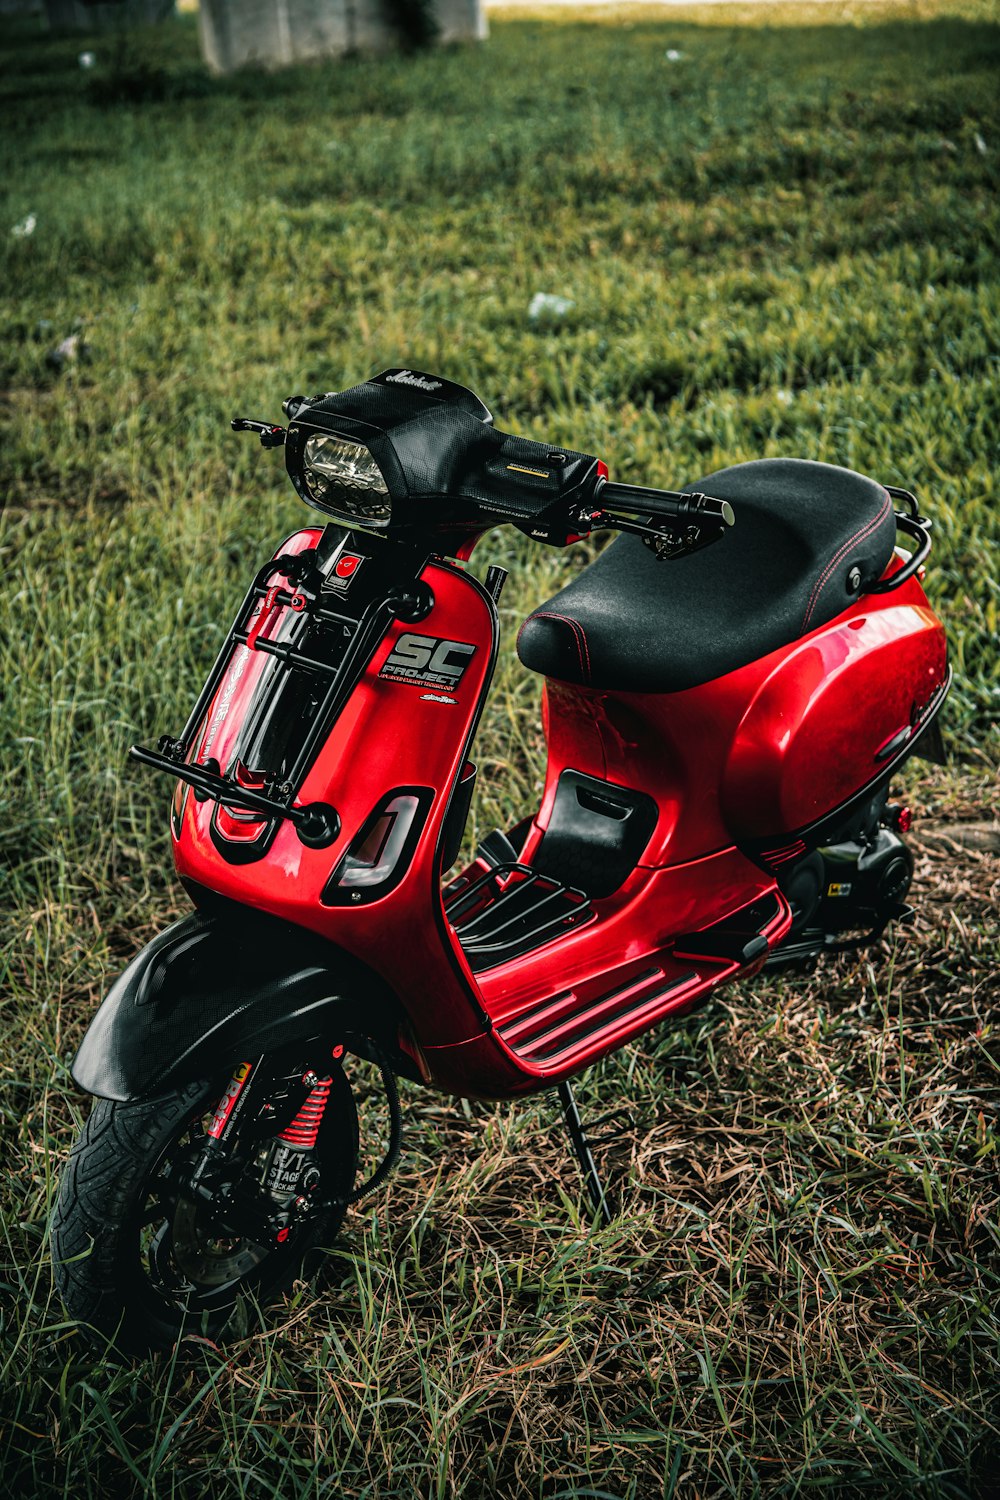 a red scooter is parked in a grassy field